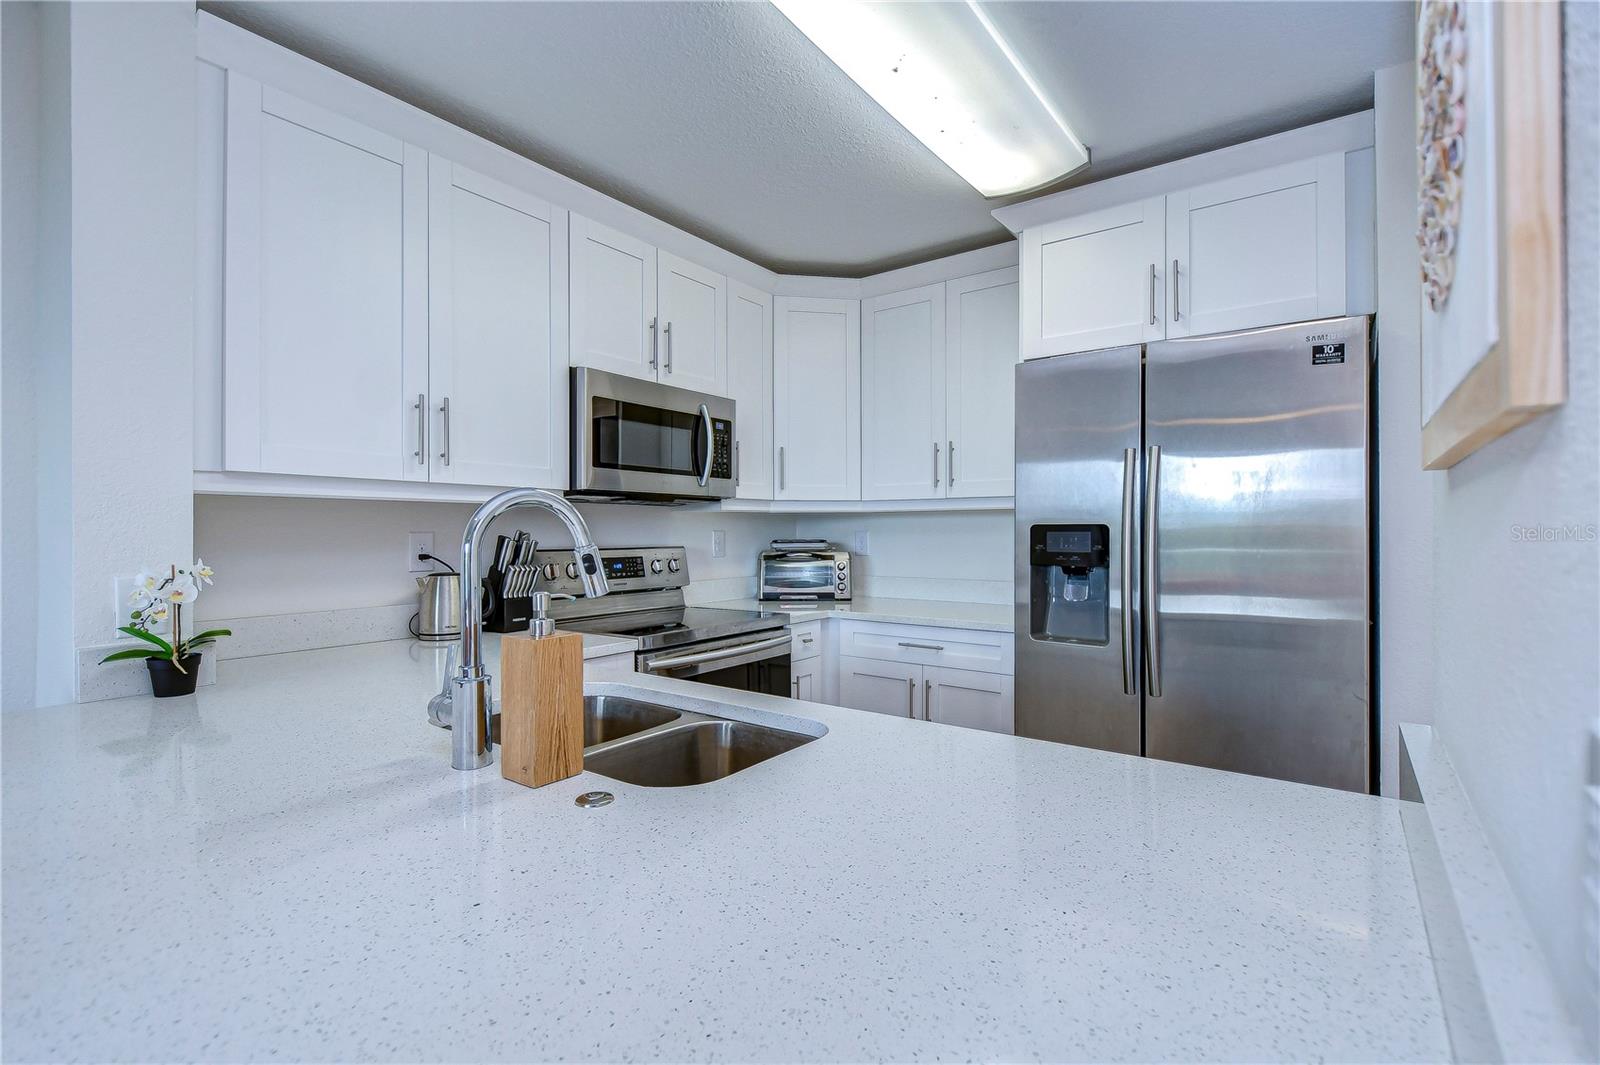 Quartz countertops and stainless appliances!